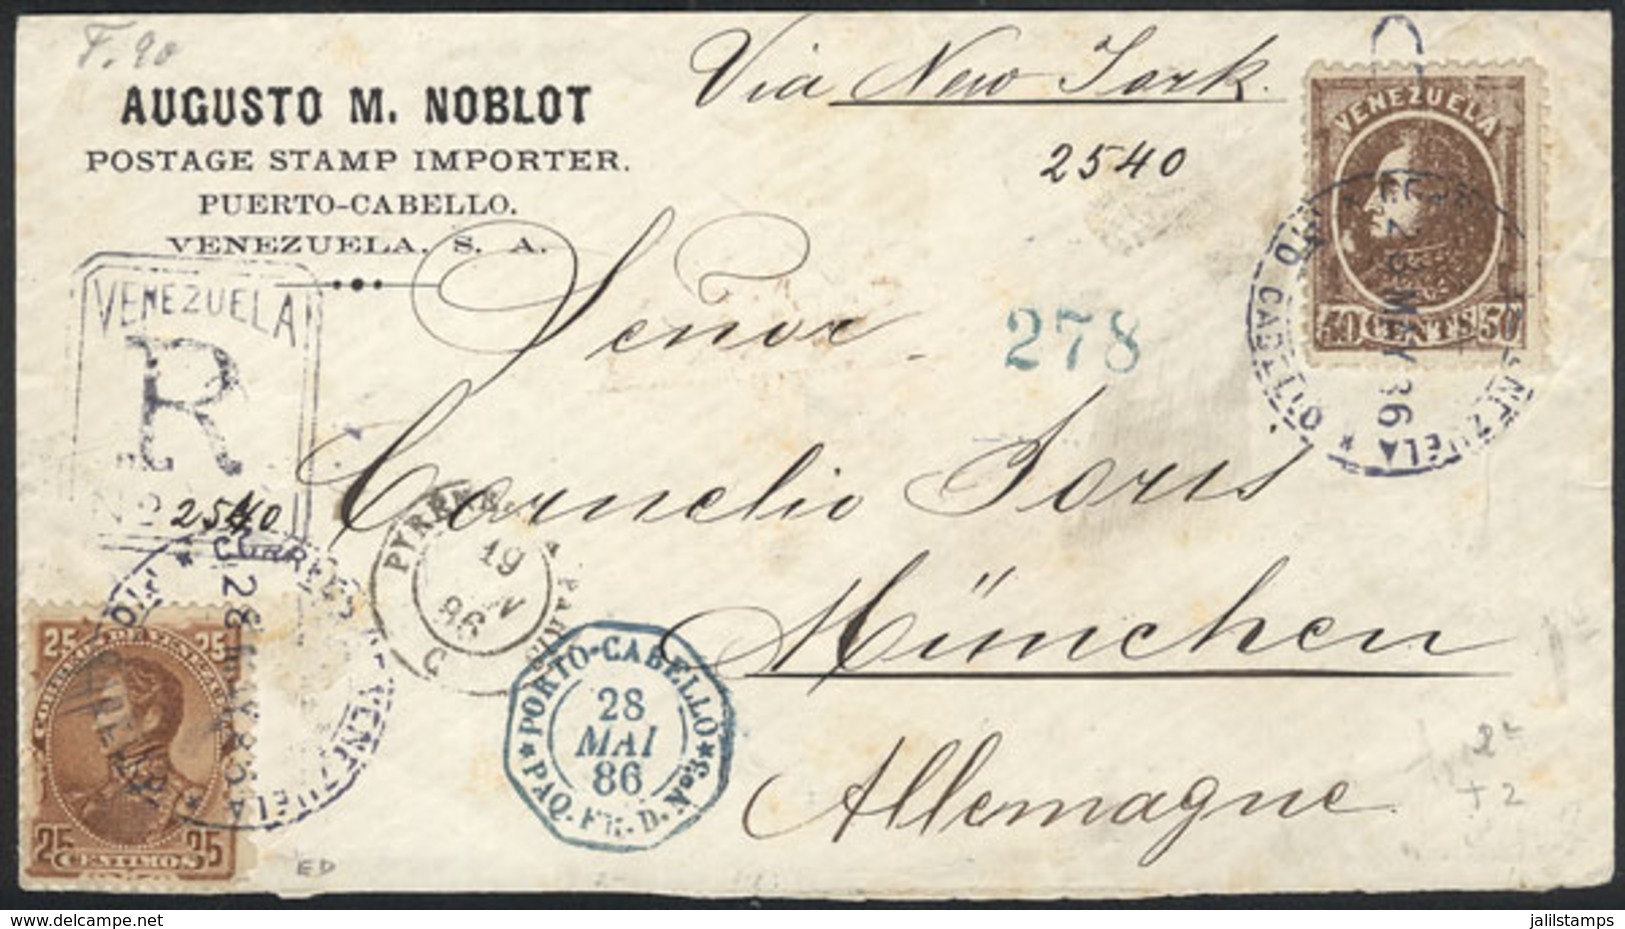 VENEZUELA: 28/MAY/1886 P.Cabello - Munchen (Germany): Registered Cover Franked By Sc.72 + 76, Via French Paquebot, VF Qu - Venezuela